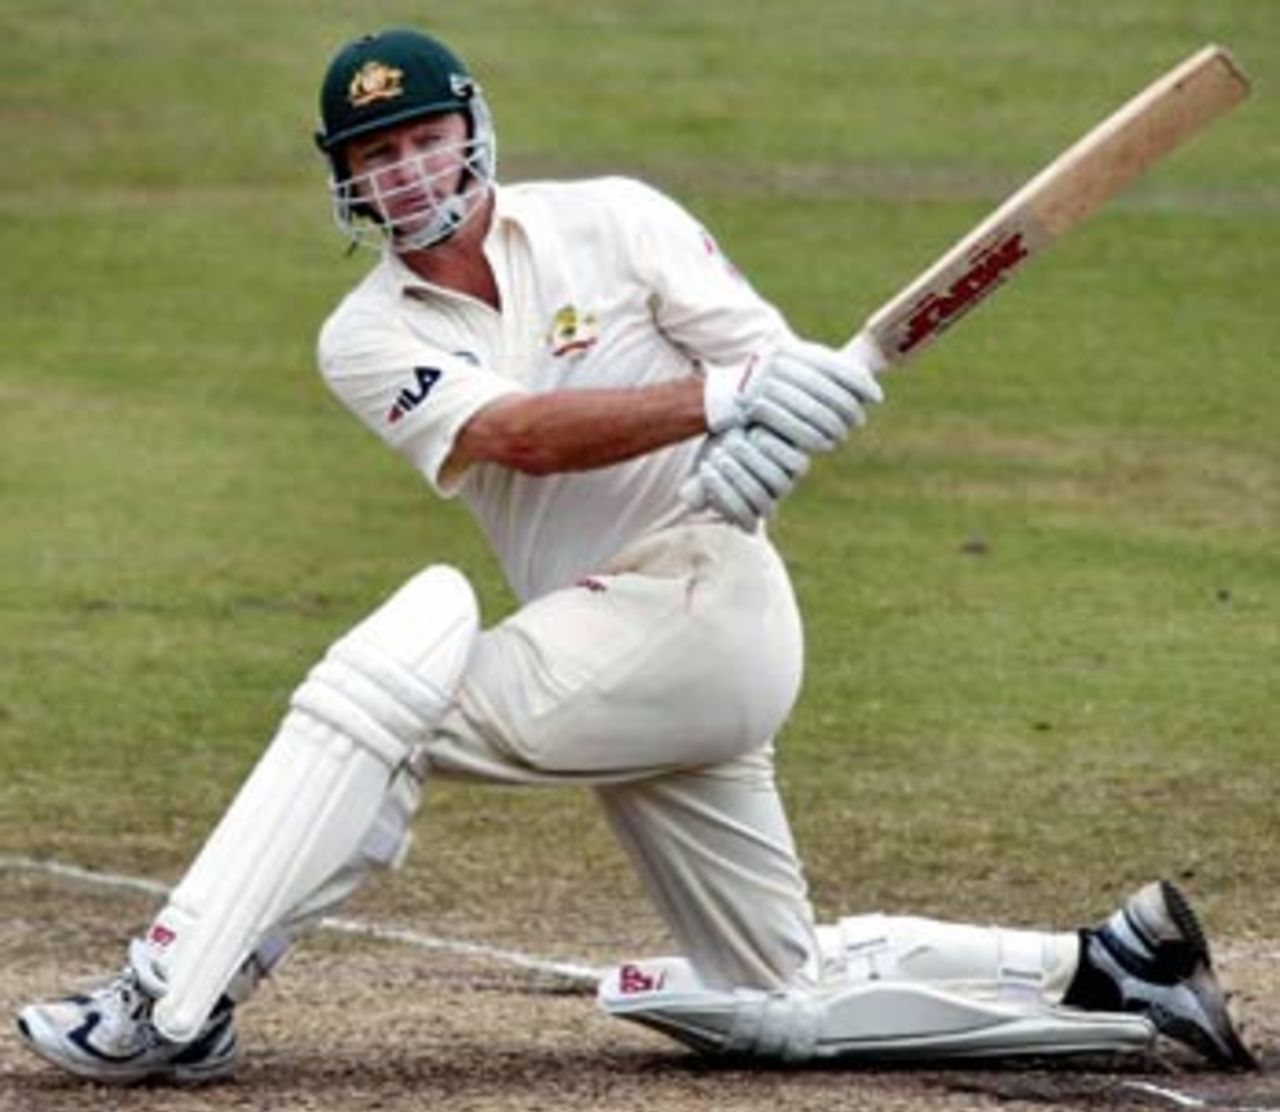 Steve Waugh played that famous slog-sweep with panache, Australia v India, 4th Test, Sydney, 5th day, January 6, 2004